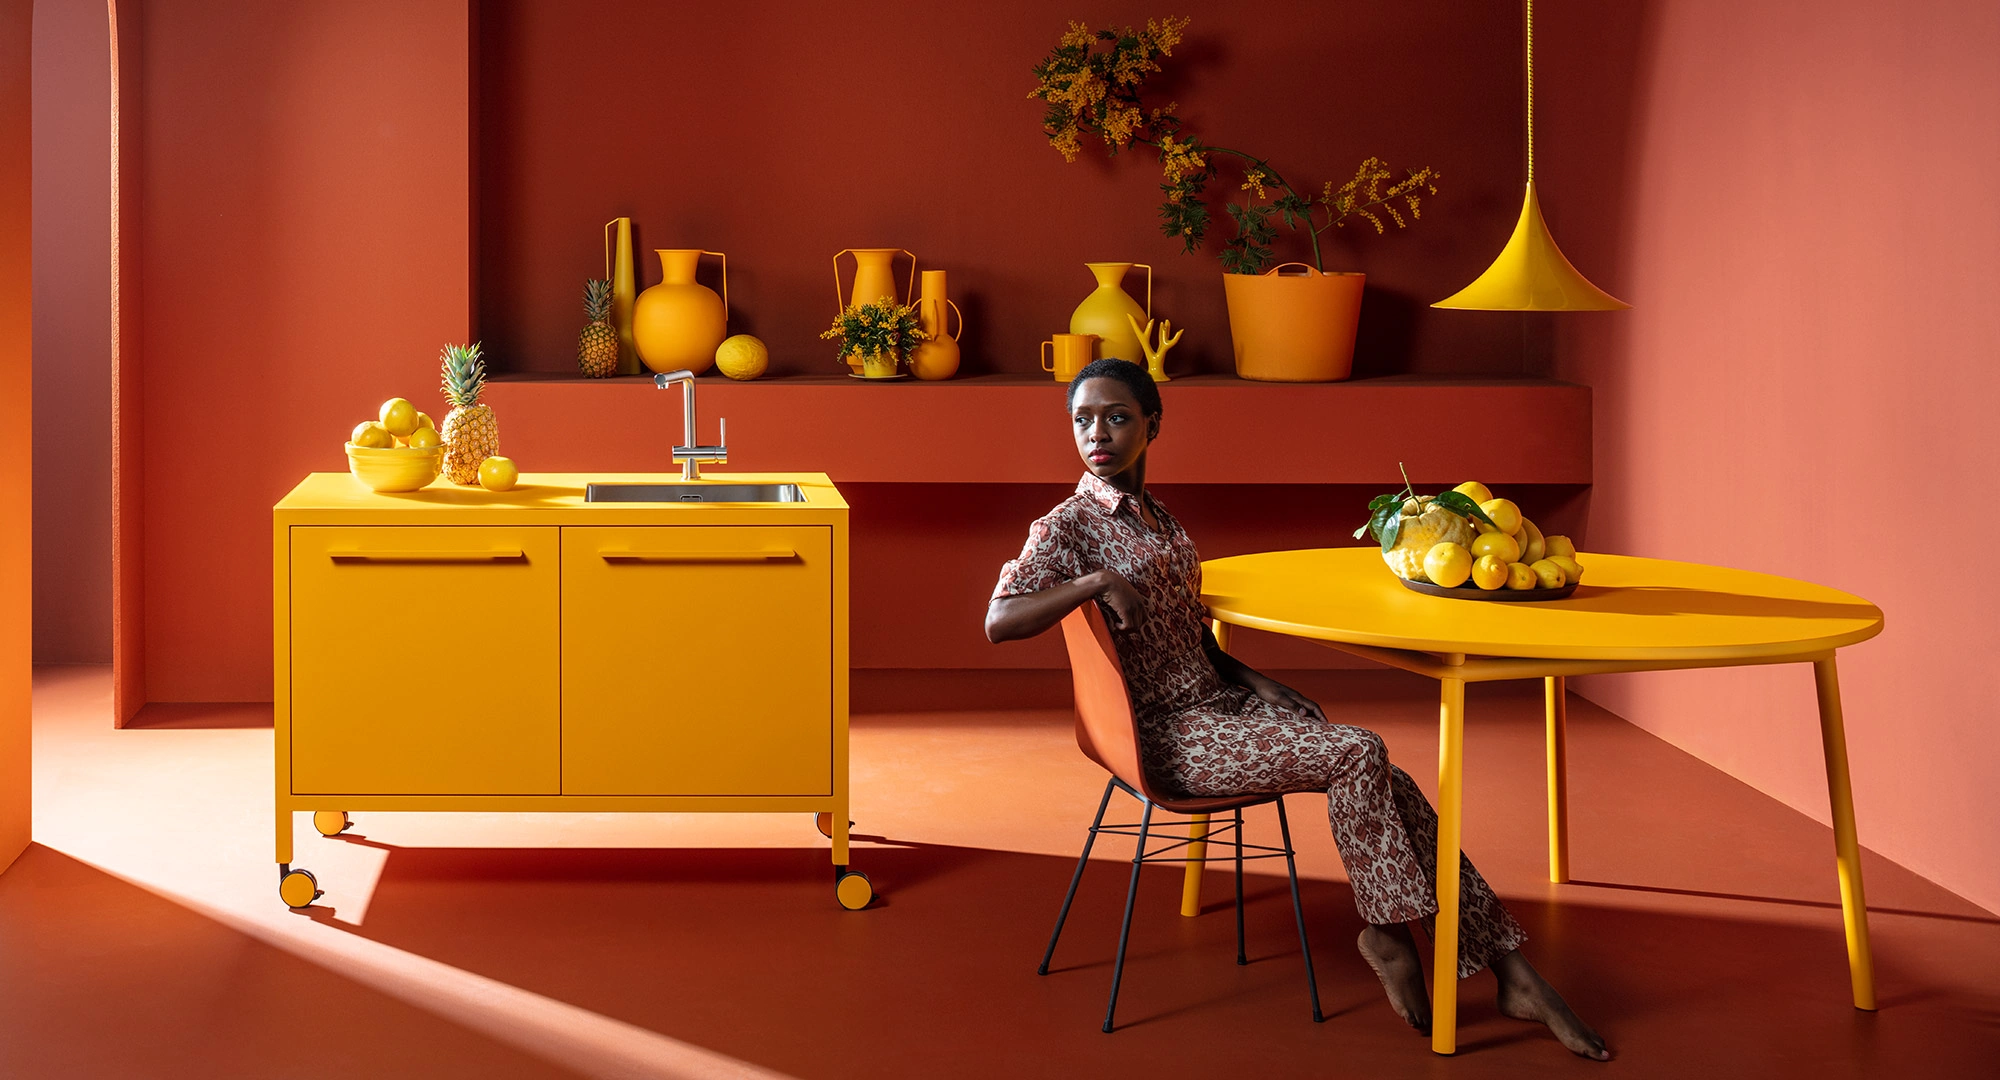 Small metal kitchen on casters in yellow color